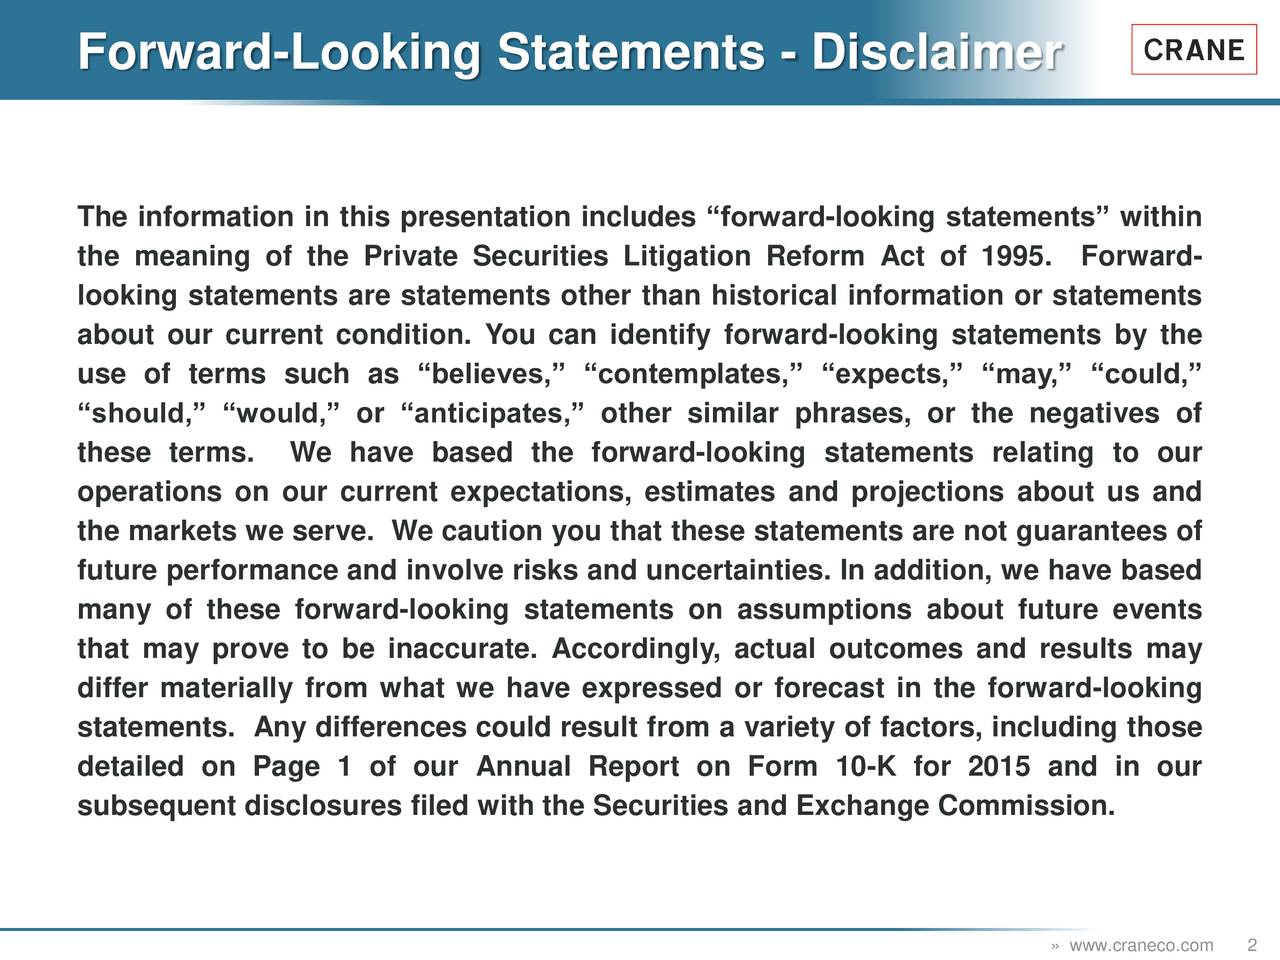 Forward-Looking Statements - Disclaimer